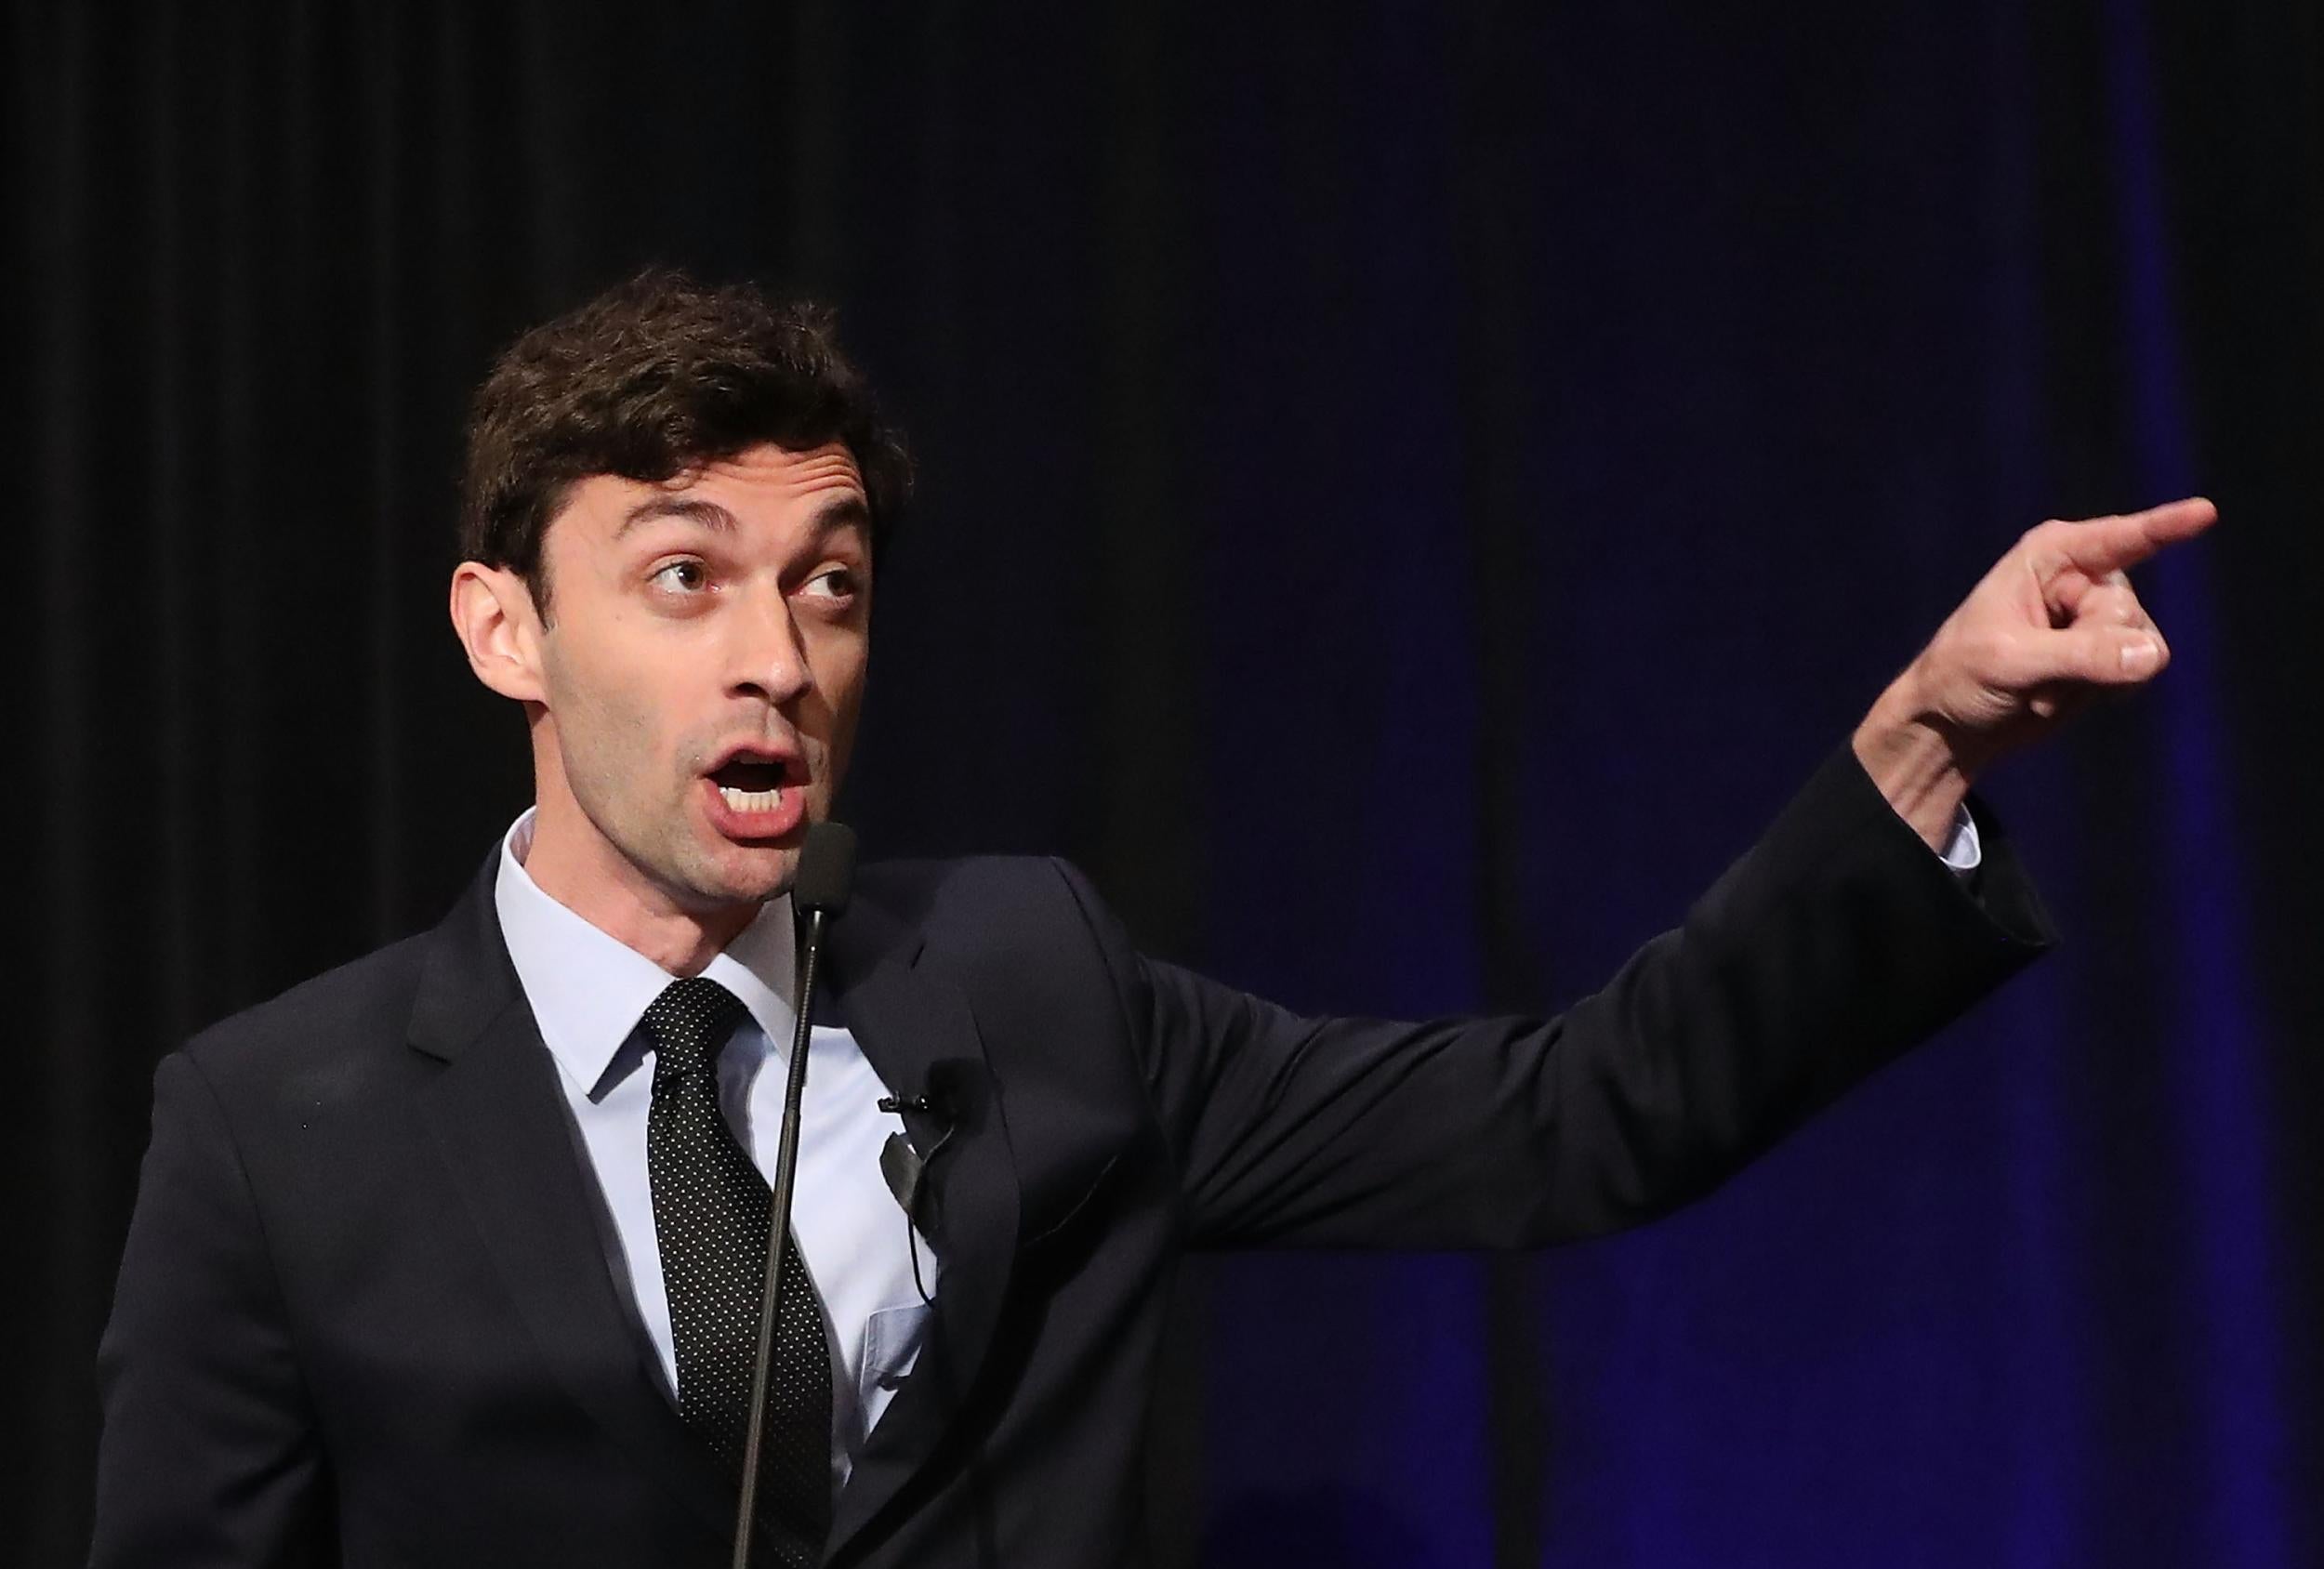 Democratic candidate Jon Ossoff speaks to his supporters in Georgia's 6th Congressional District